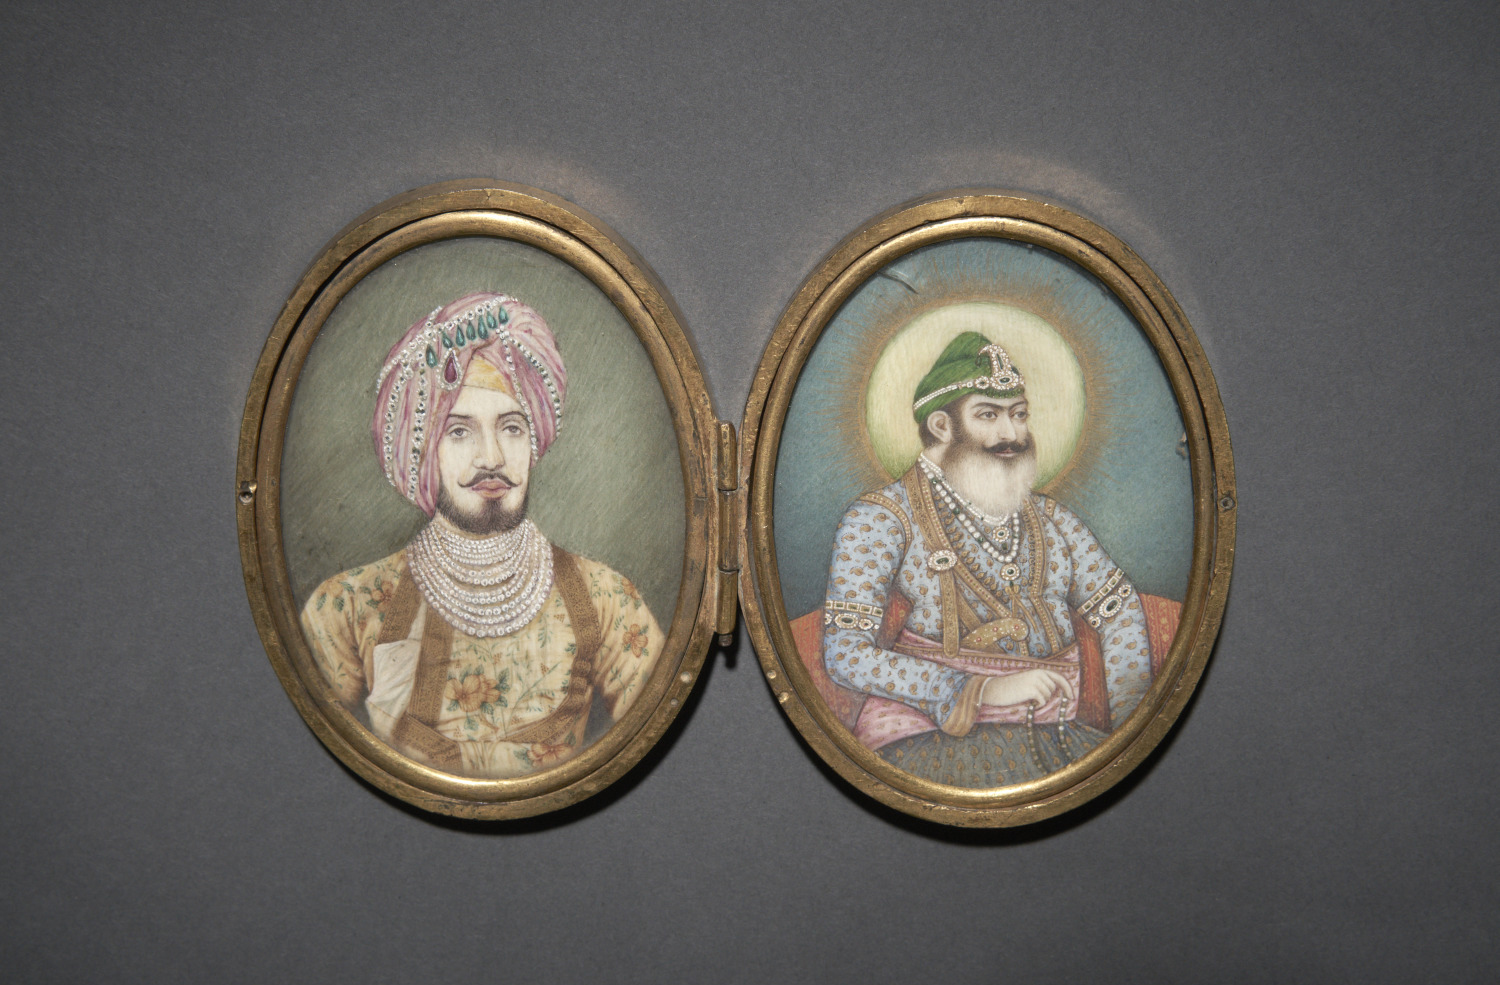 Princely States of the Punjab: Sikh Art and History